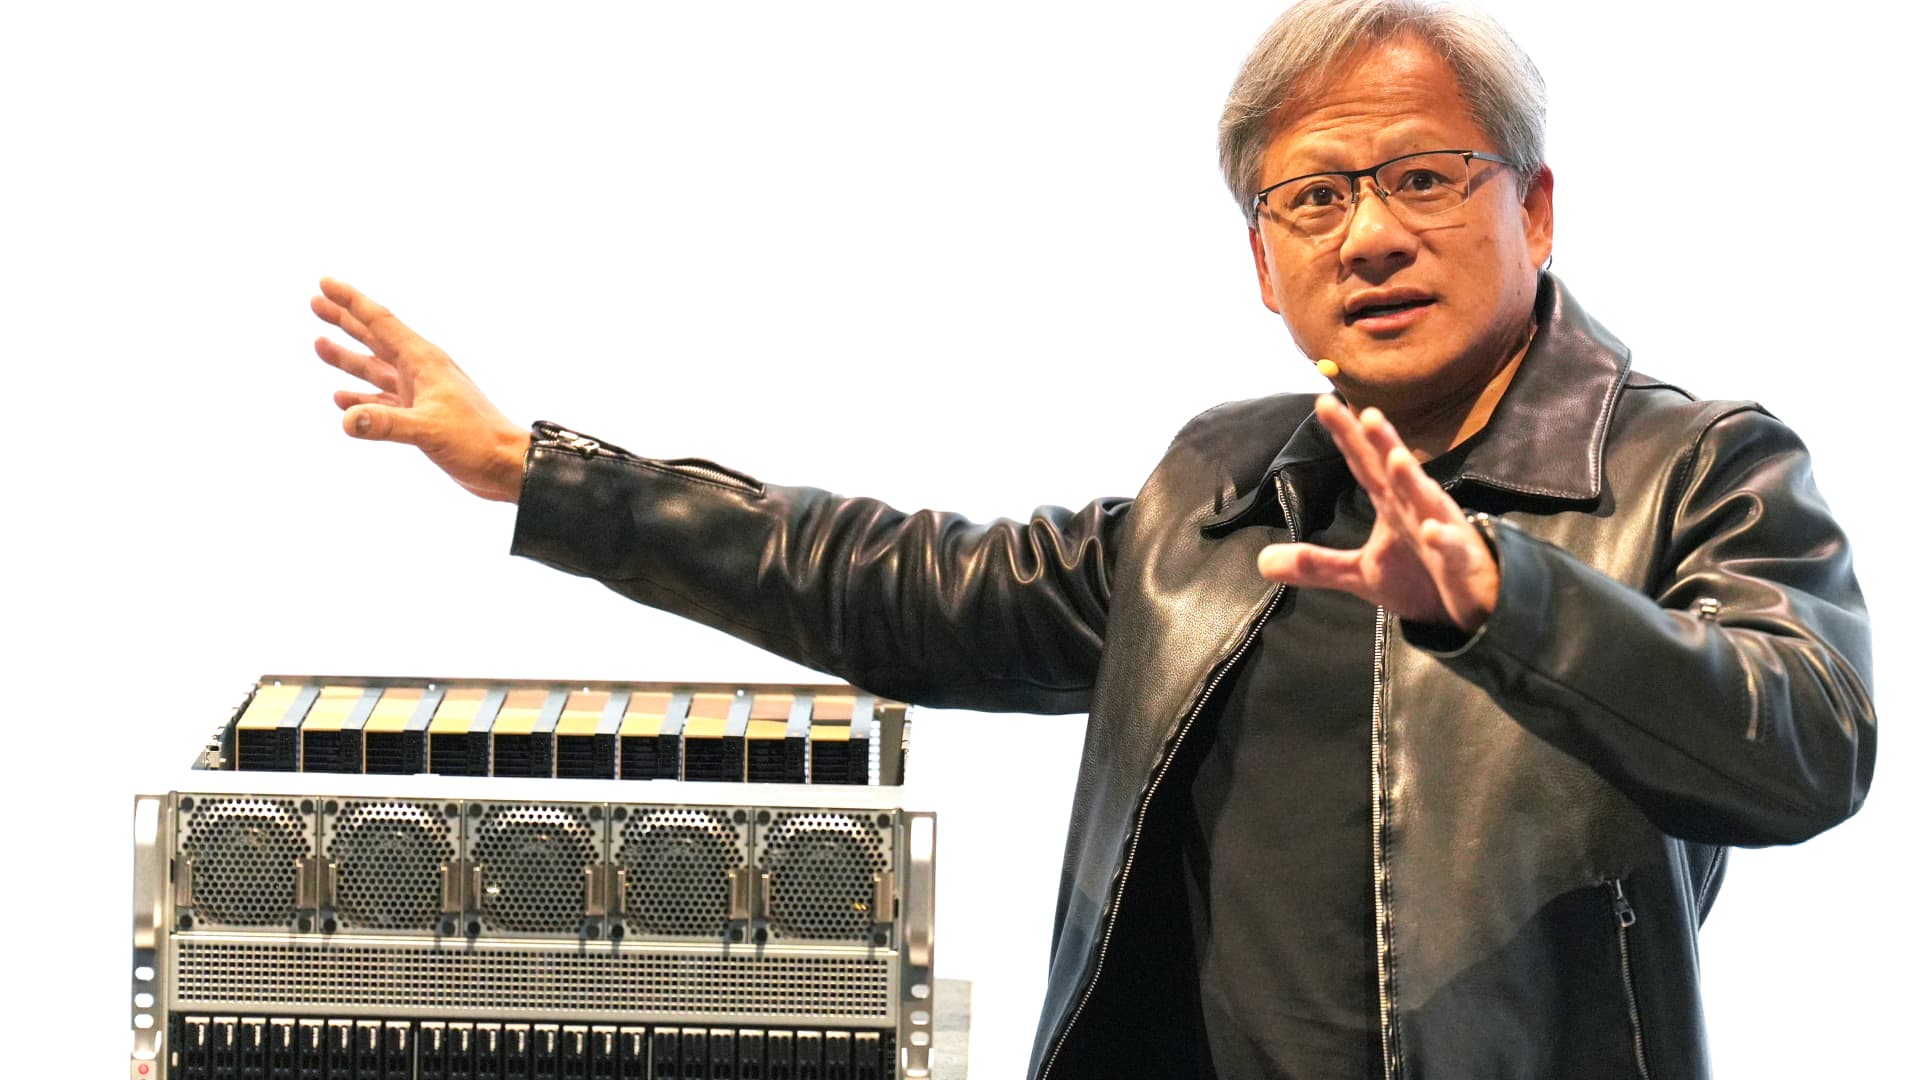 Nvidia CEO Jensen Huang speaks at the Supermicro keynote presentation during the Computex conference in Taipei on June 1, 2023.